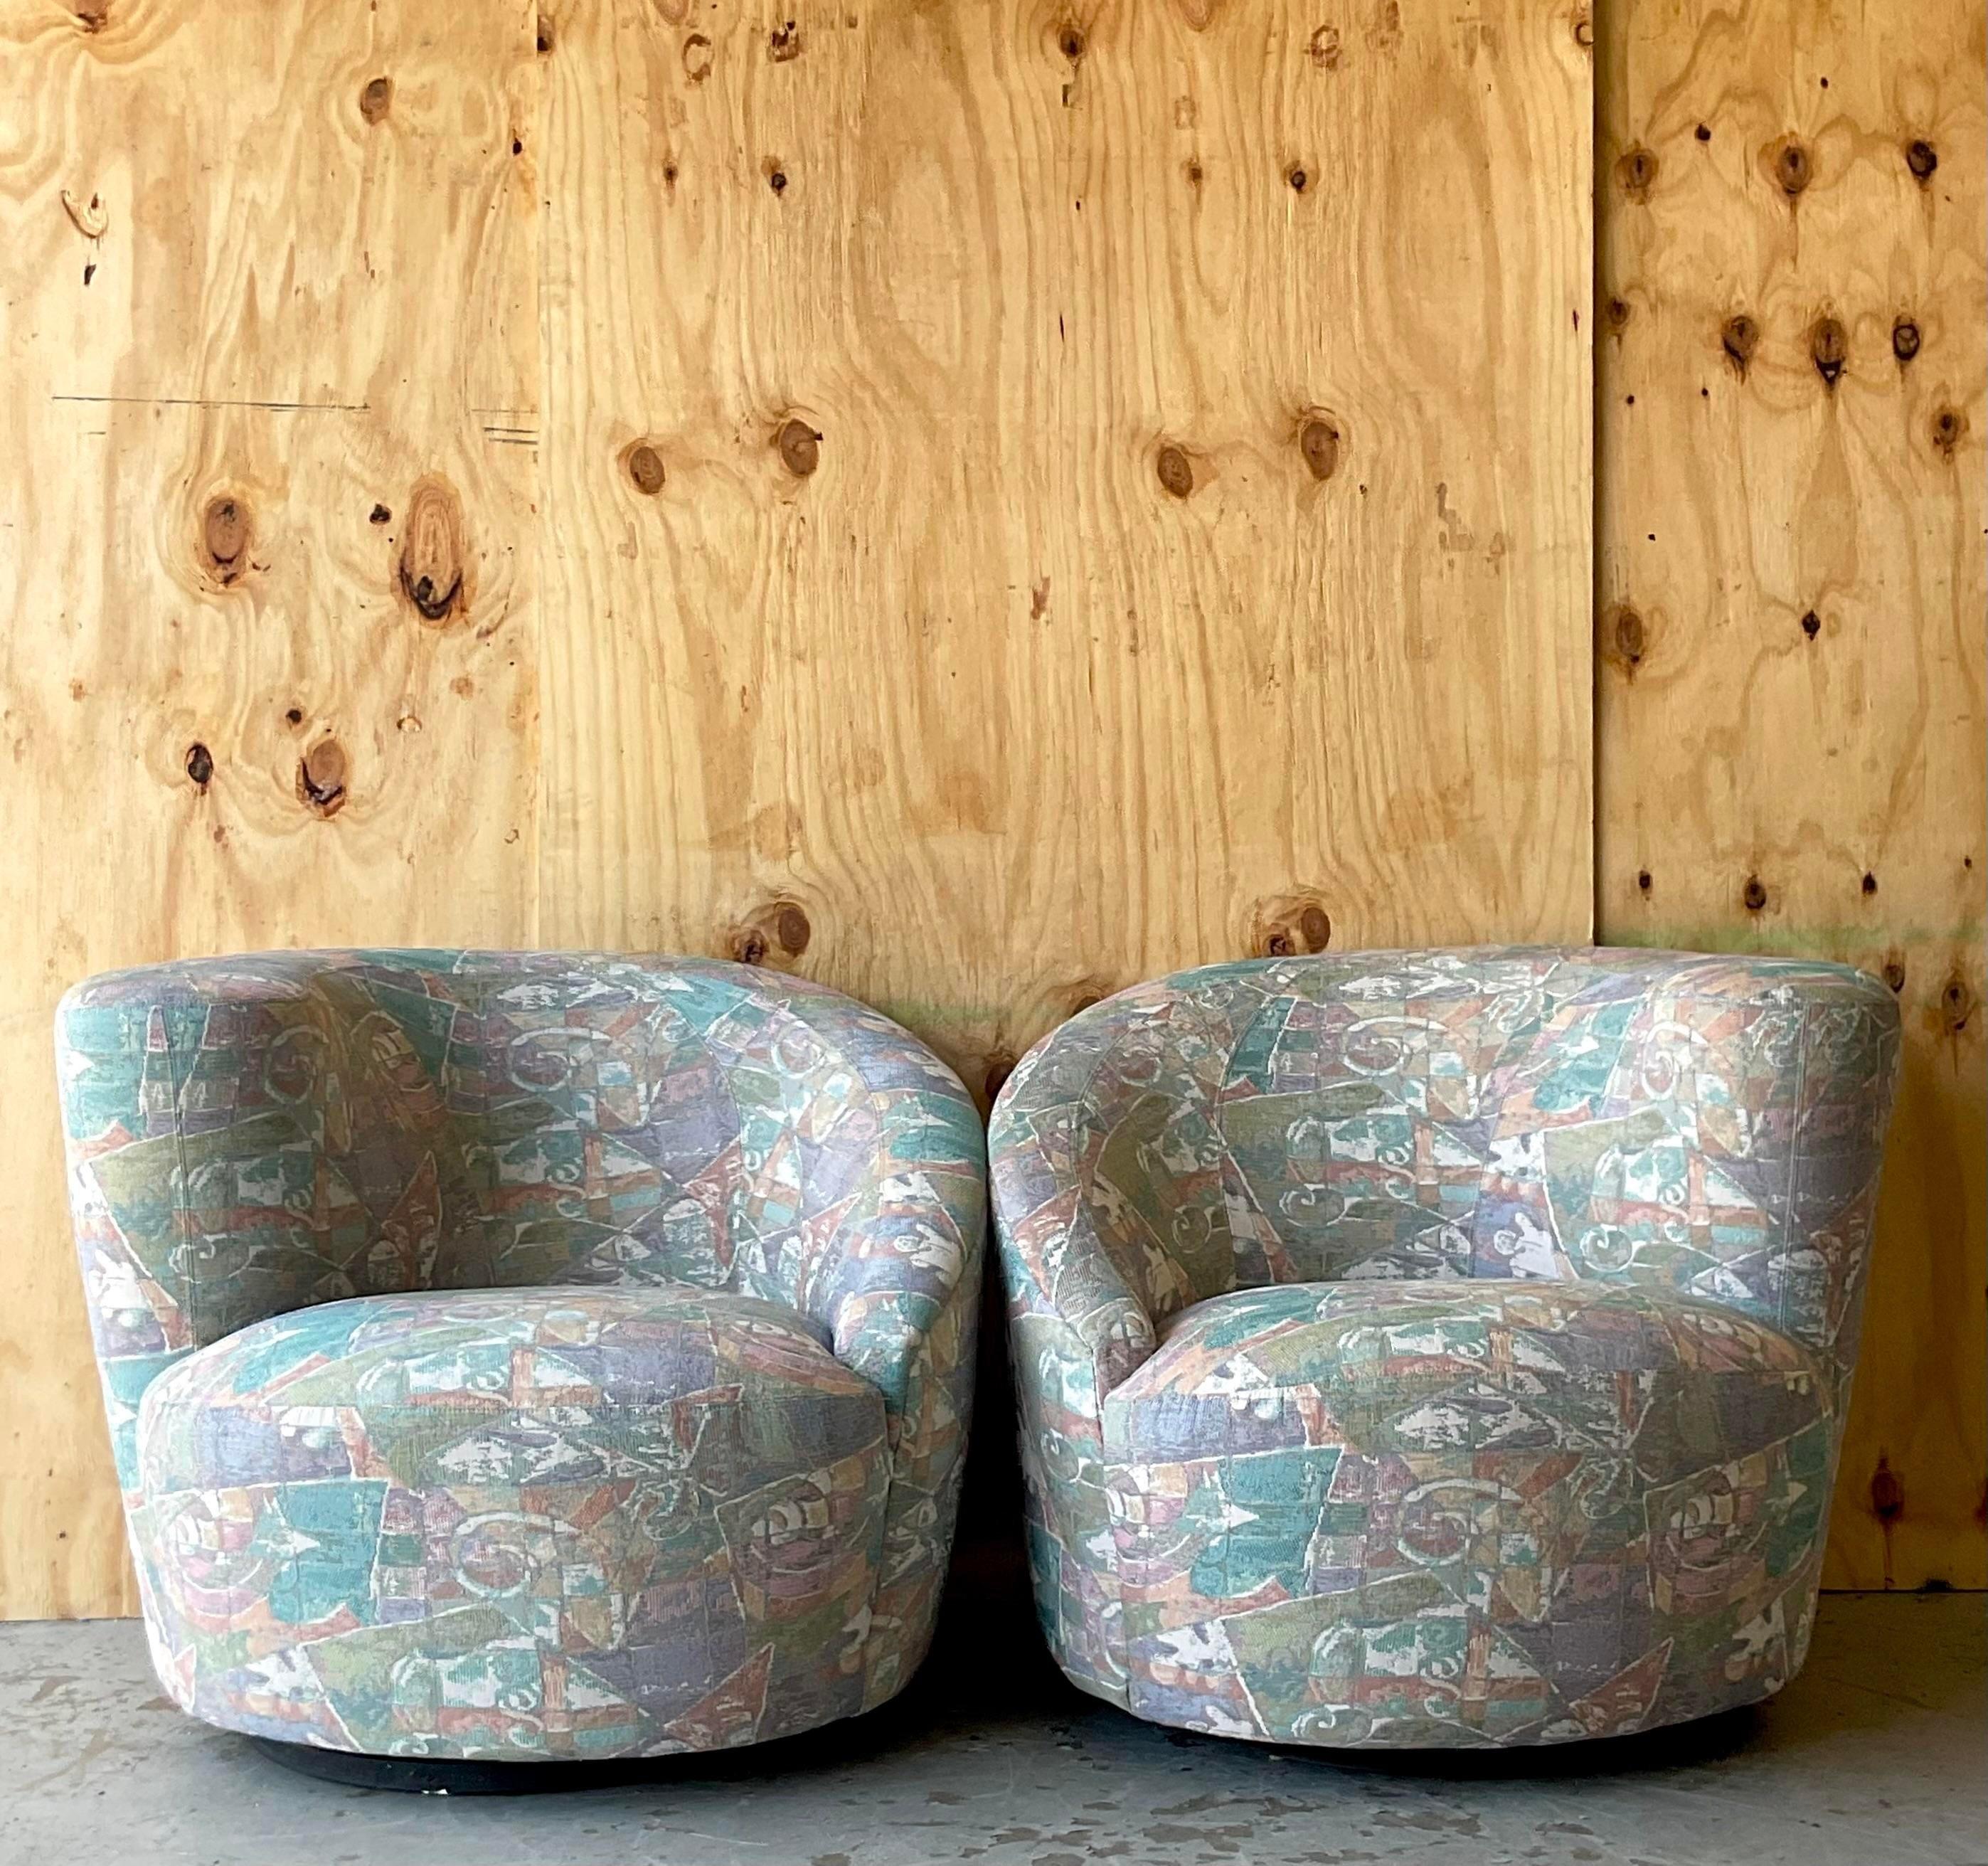 Upholstery Vintage Boho Tagged Weiman Nautilus Swivel Chairs - a Pair For Sale